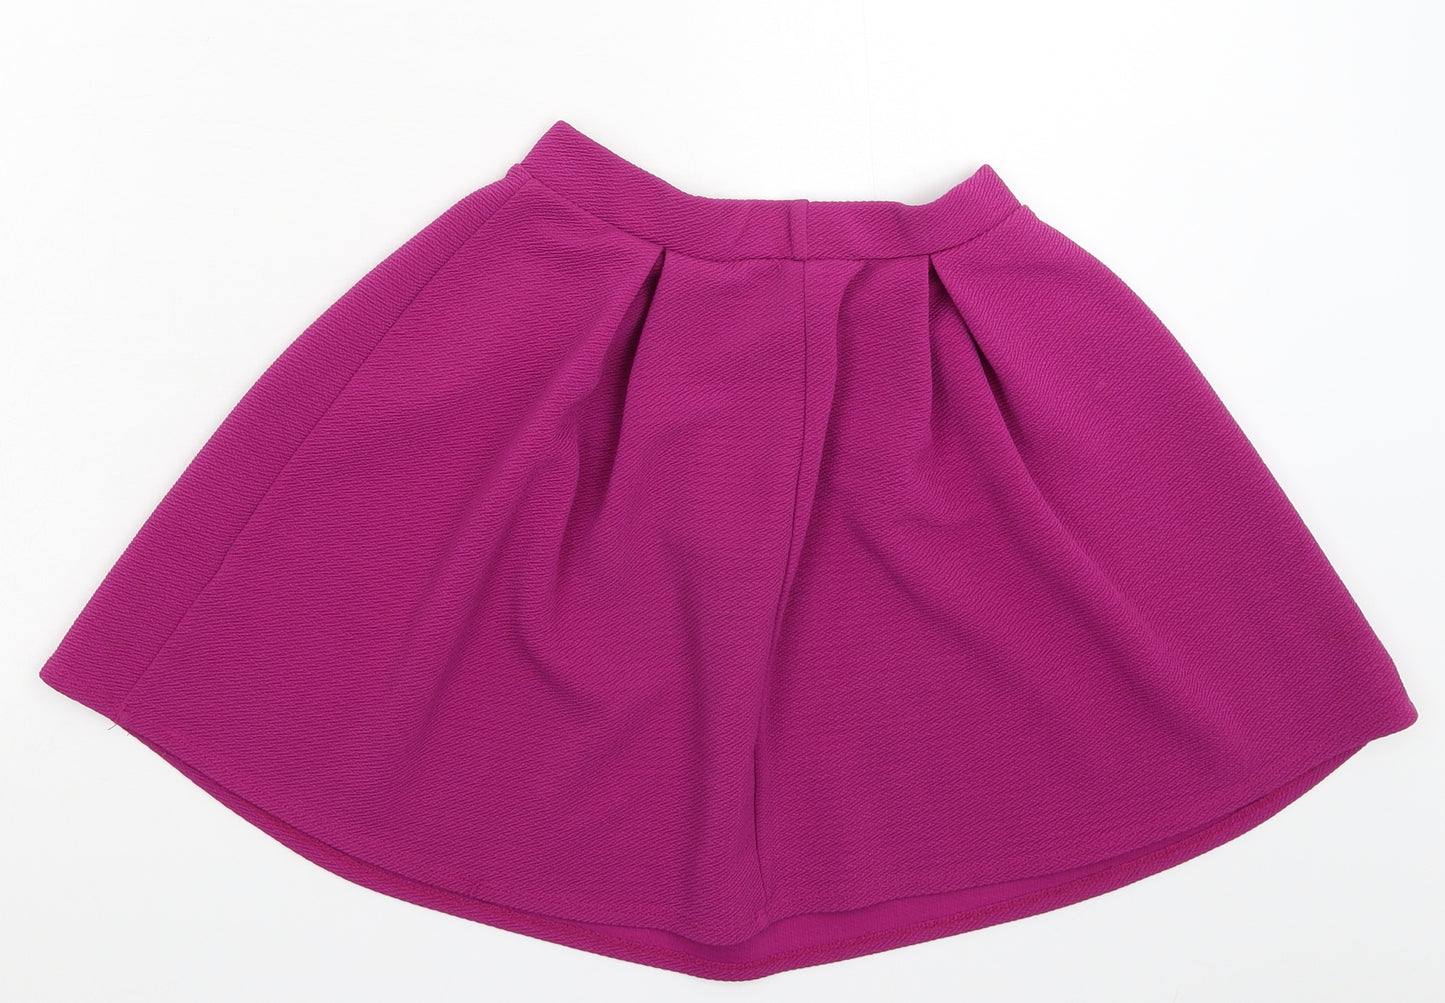 George Girls Pink   Pleated Skirt Size 10-11 Years